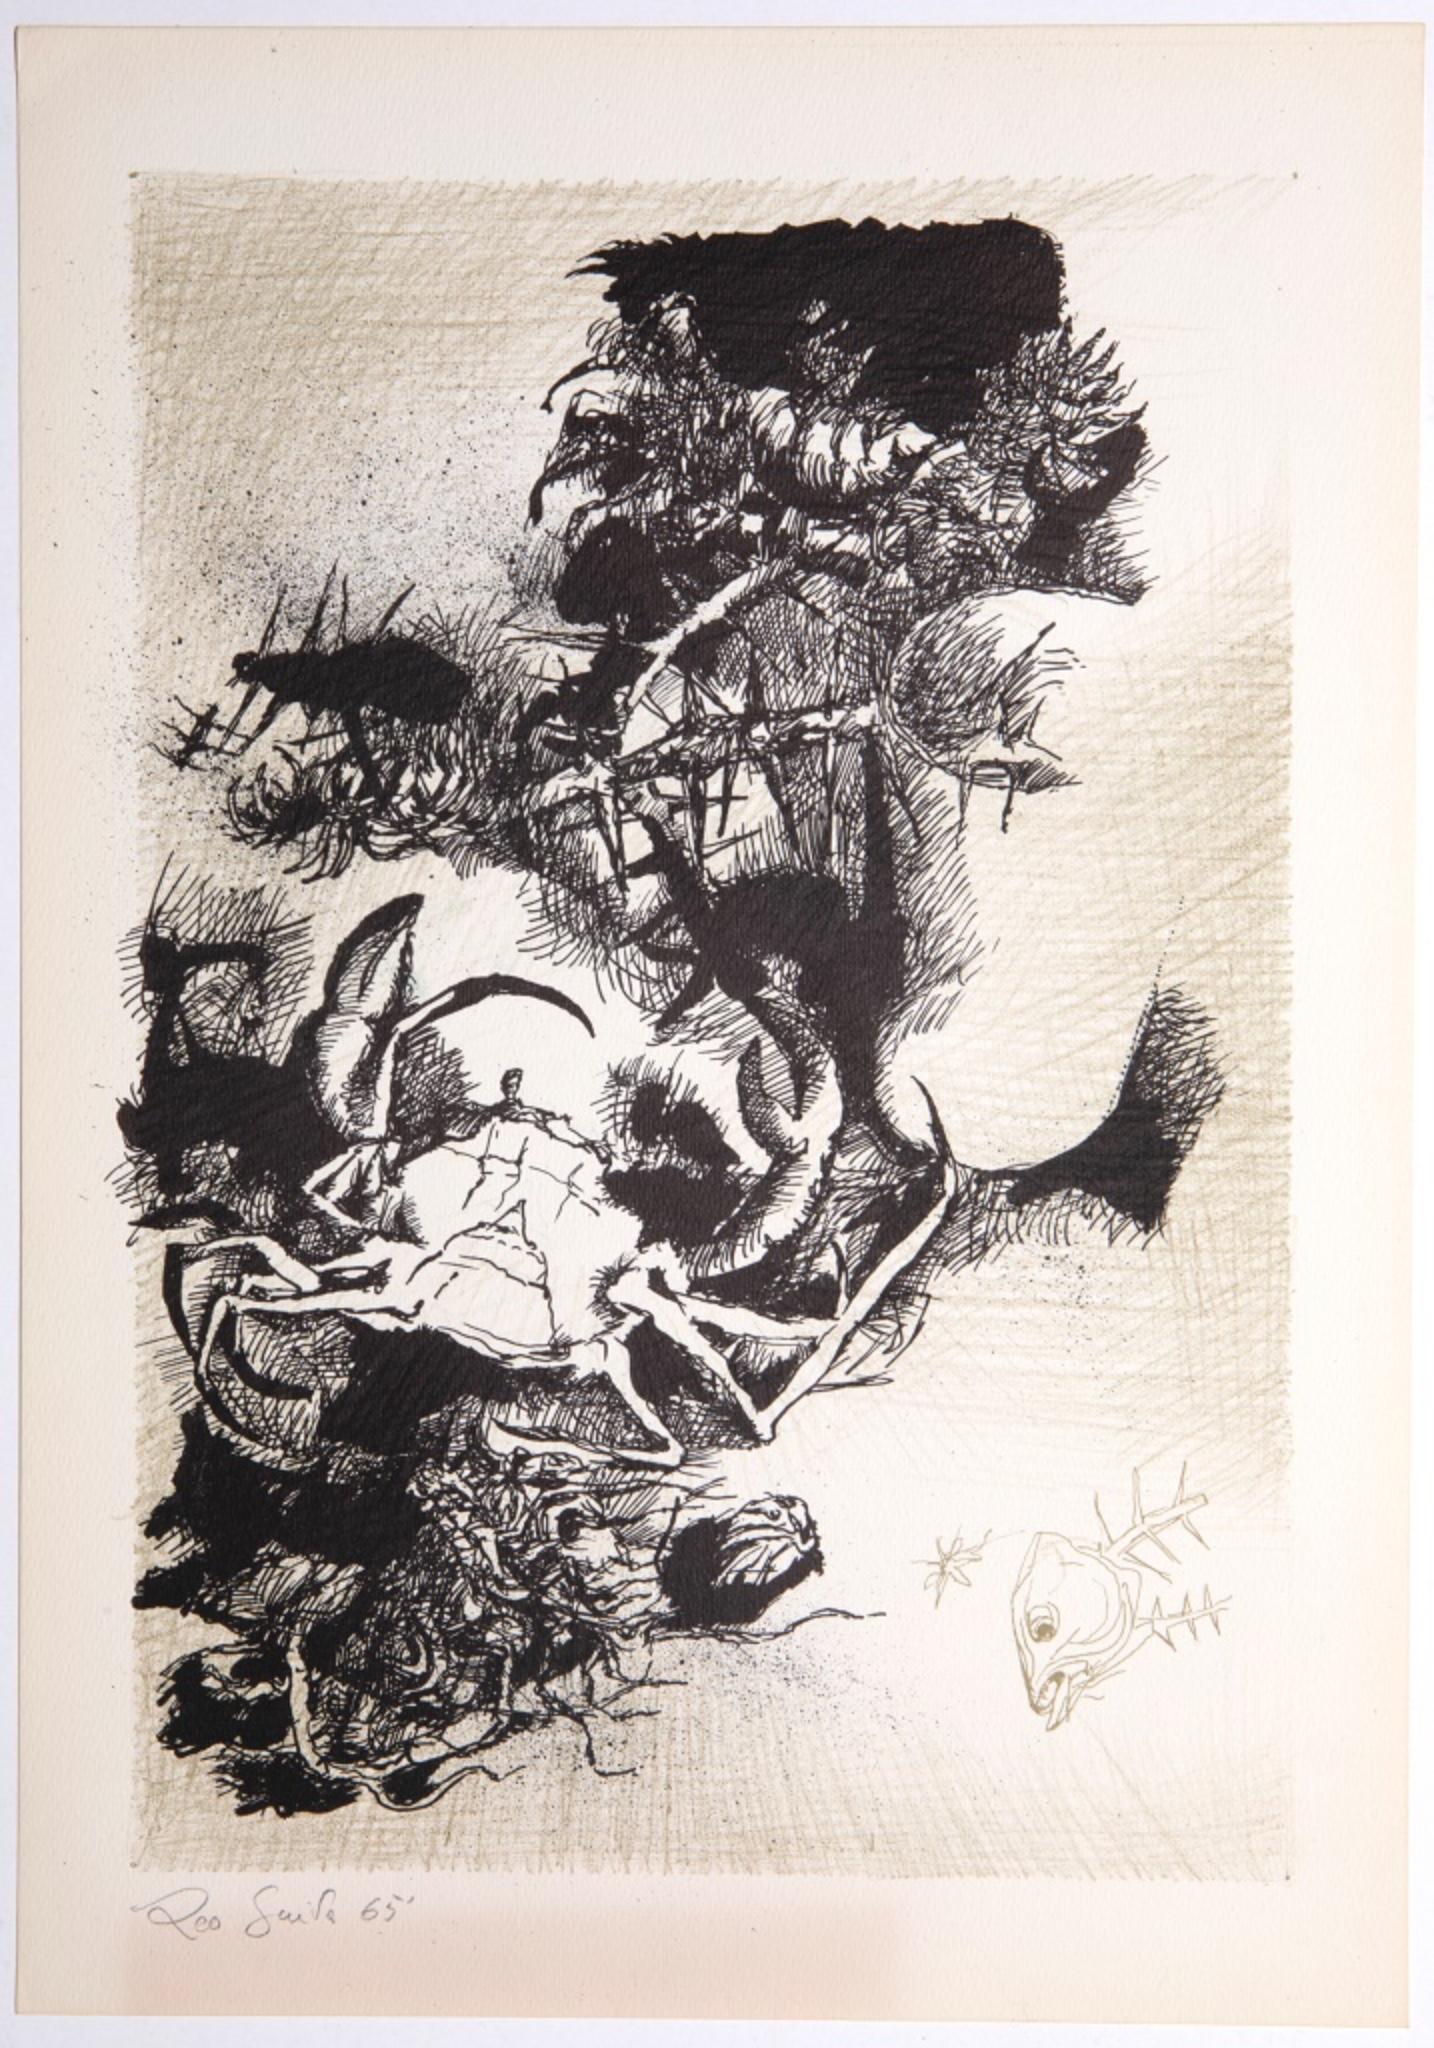 Decadence 2 is an original etching realized by Leo Guida in 1965.

The artwork is in good conditions, hand-signed by the artist on the lower left corner.

Leo Guida artist sensitive to current issues, artist movement and techniques, has been able to